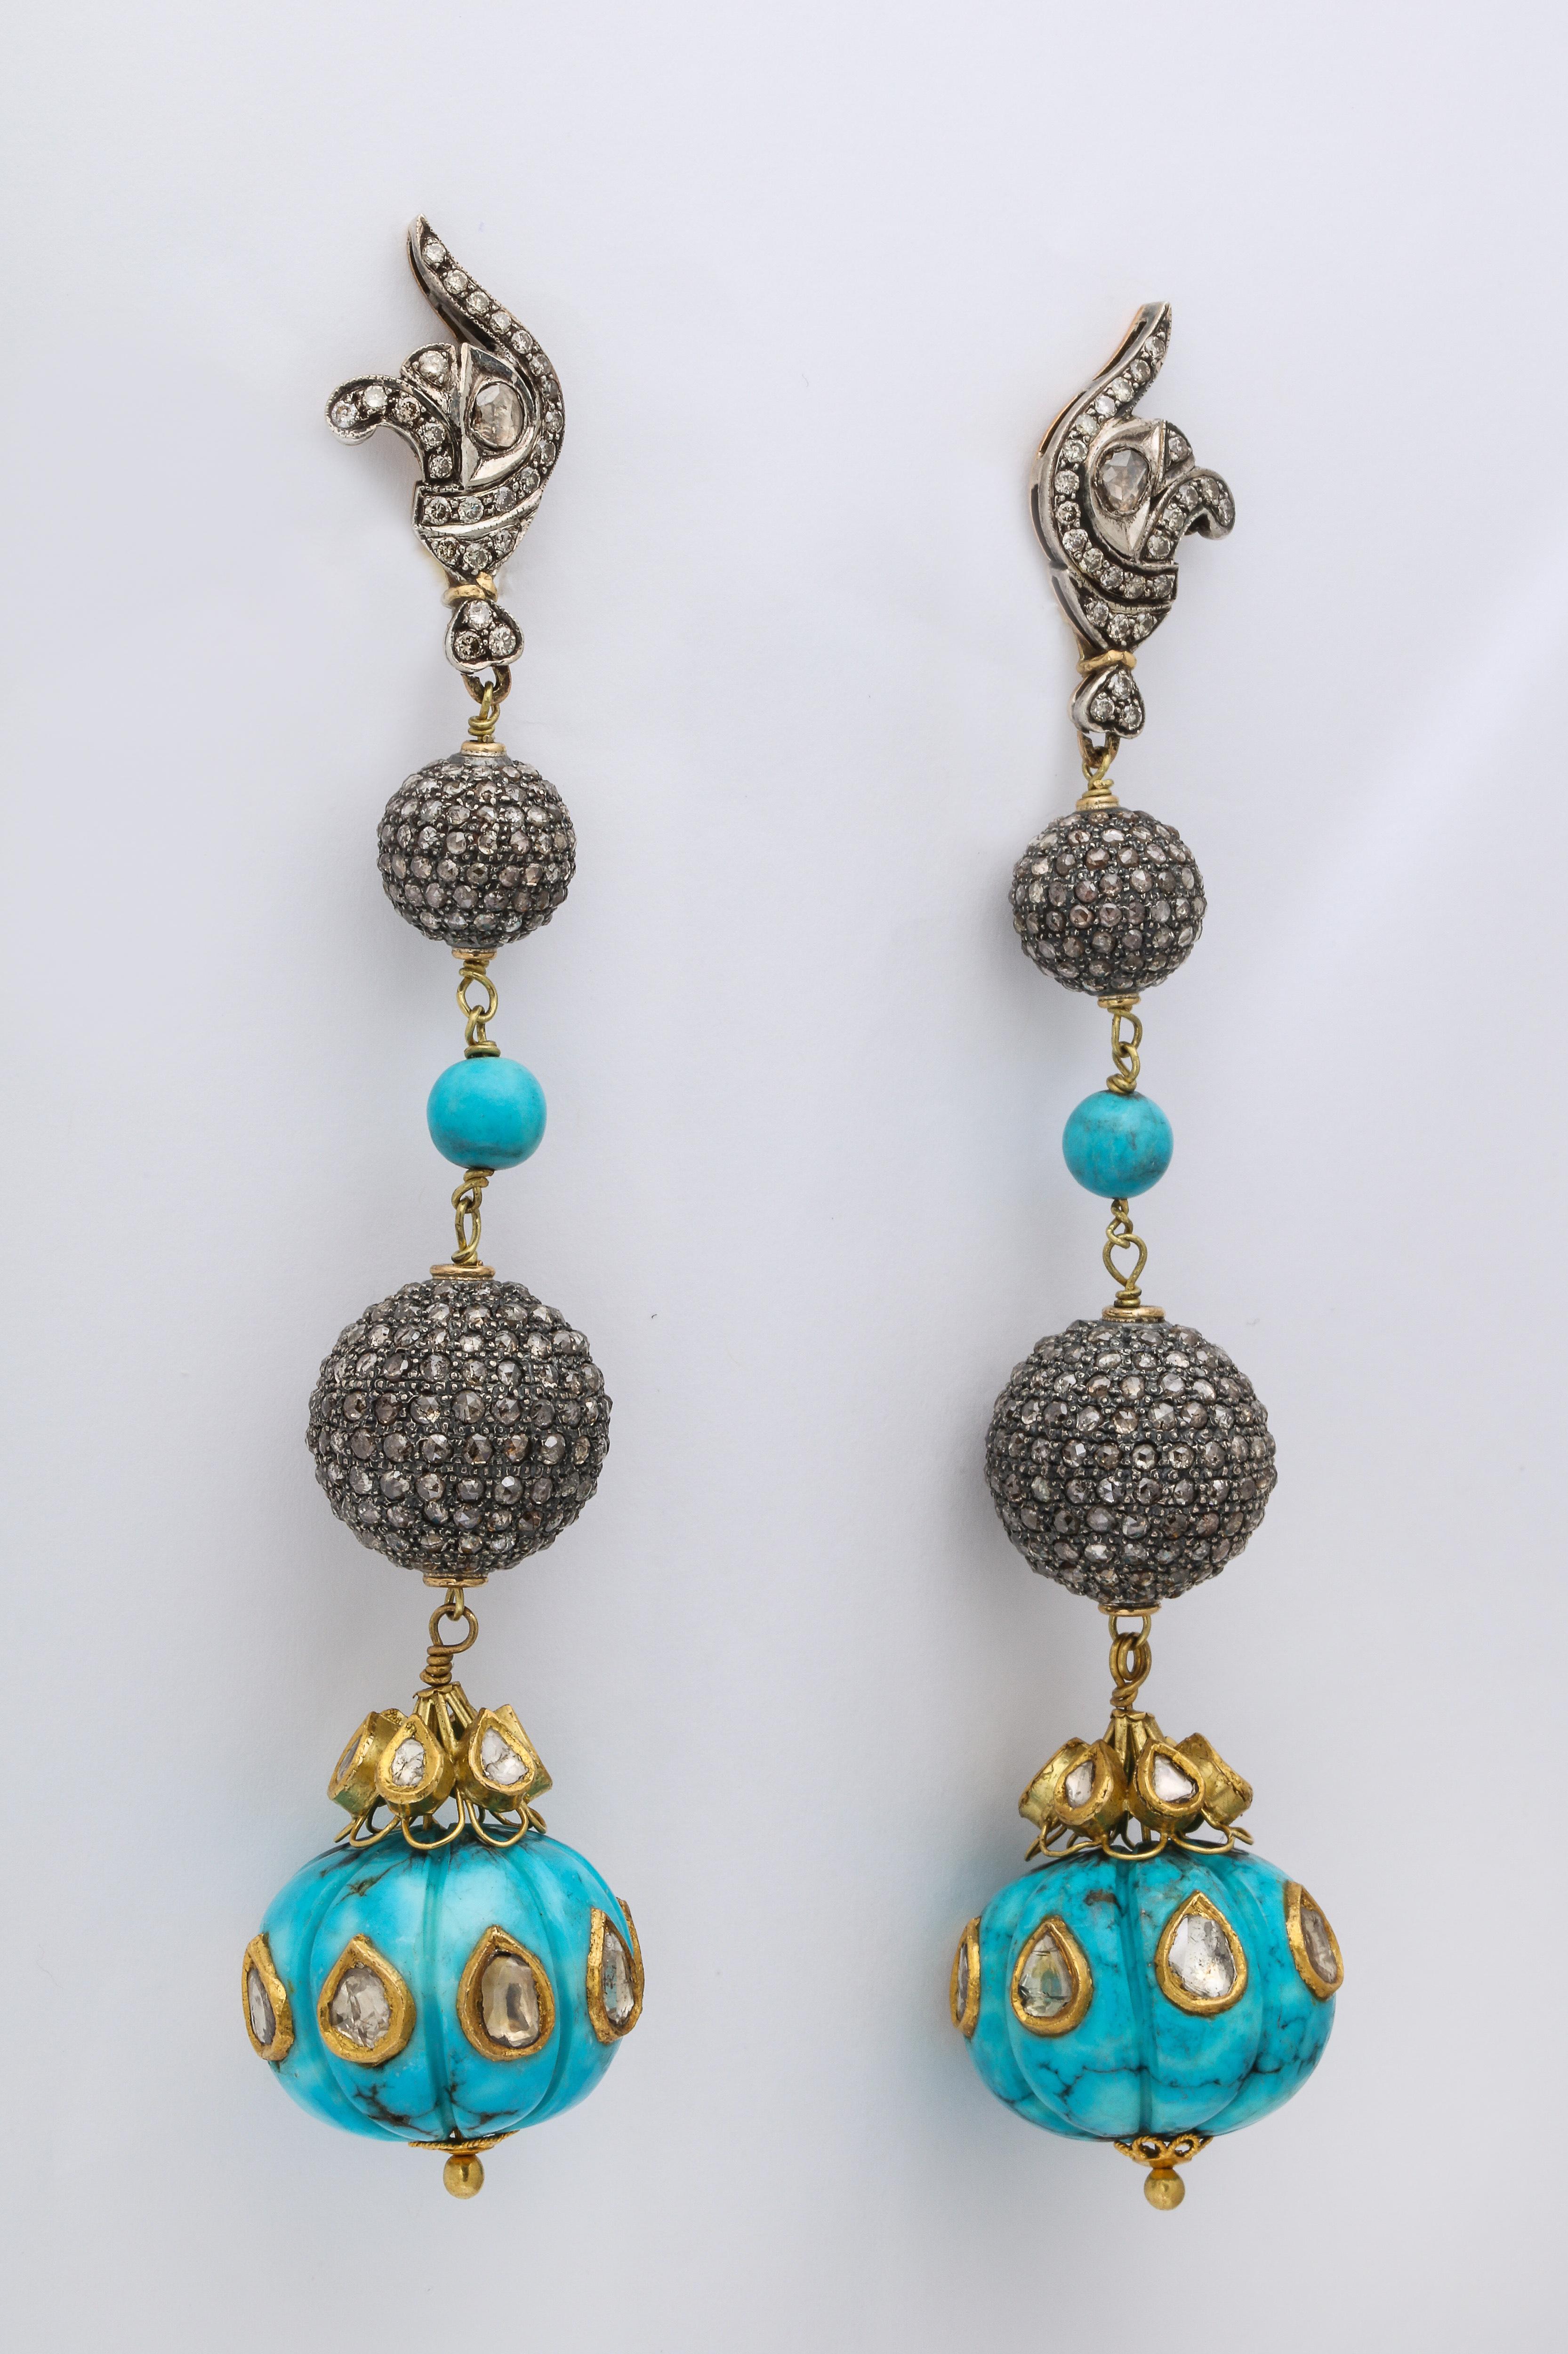 Very Elegant Estate Pair of large Turquoise Drop Earrings with Rose cut Diamonds

Total height is 4